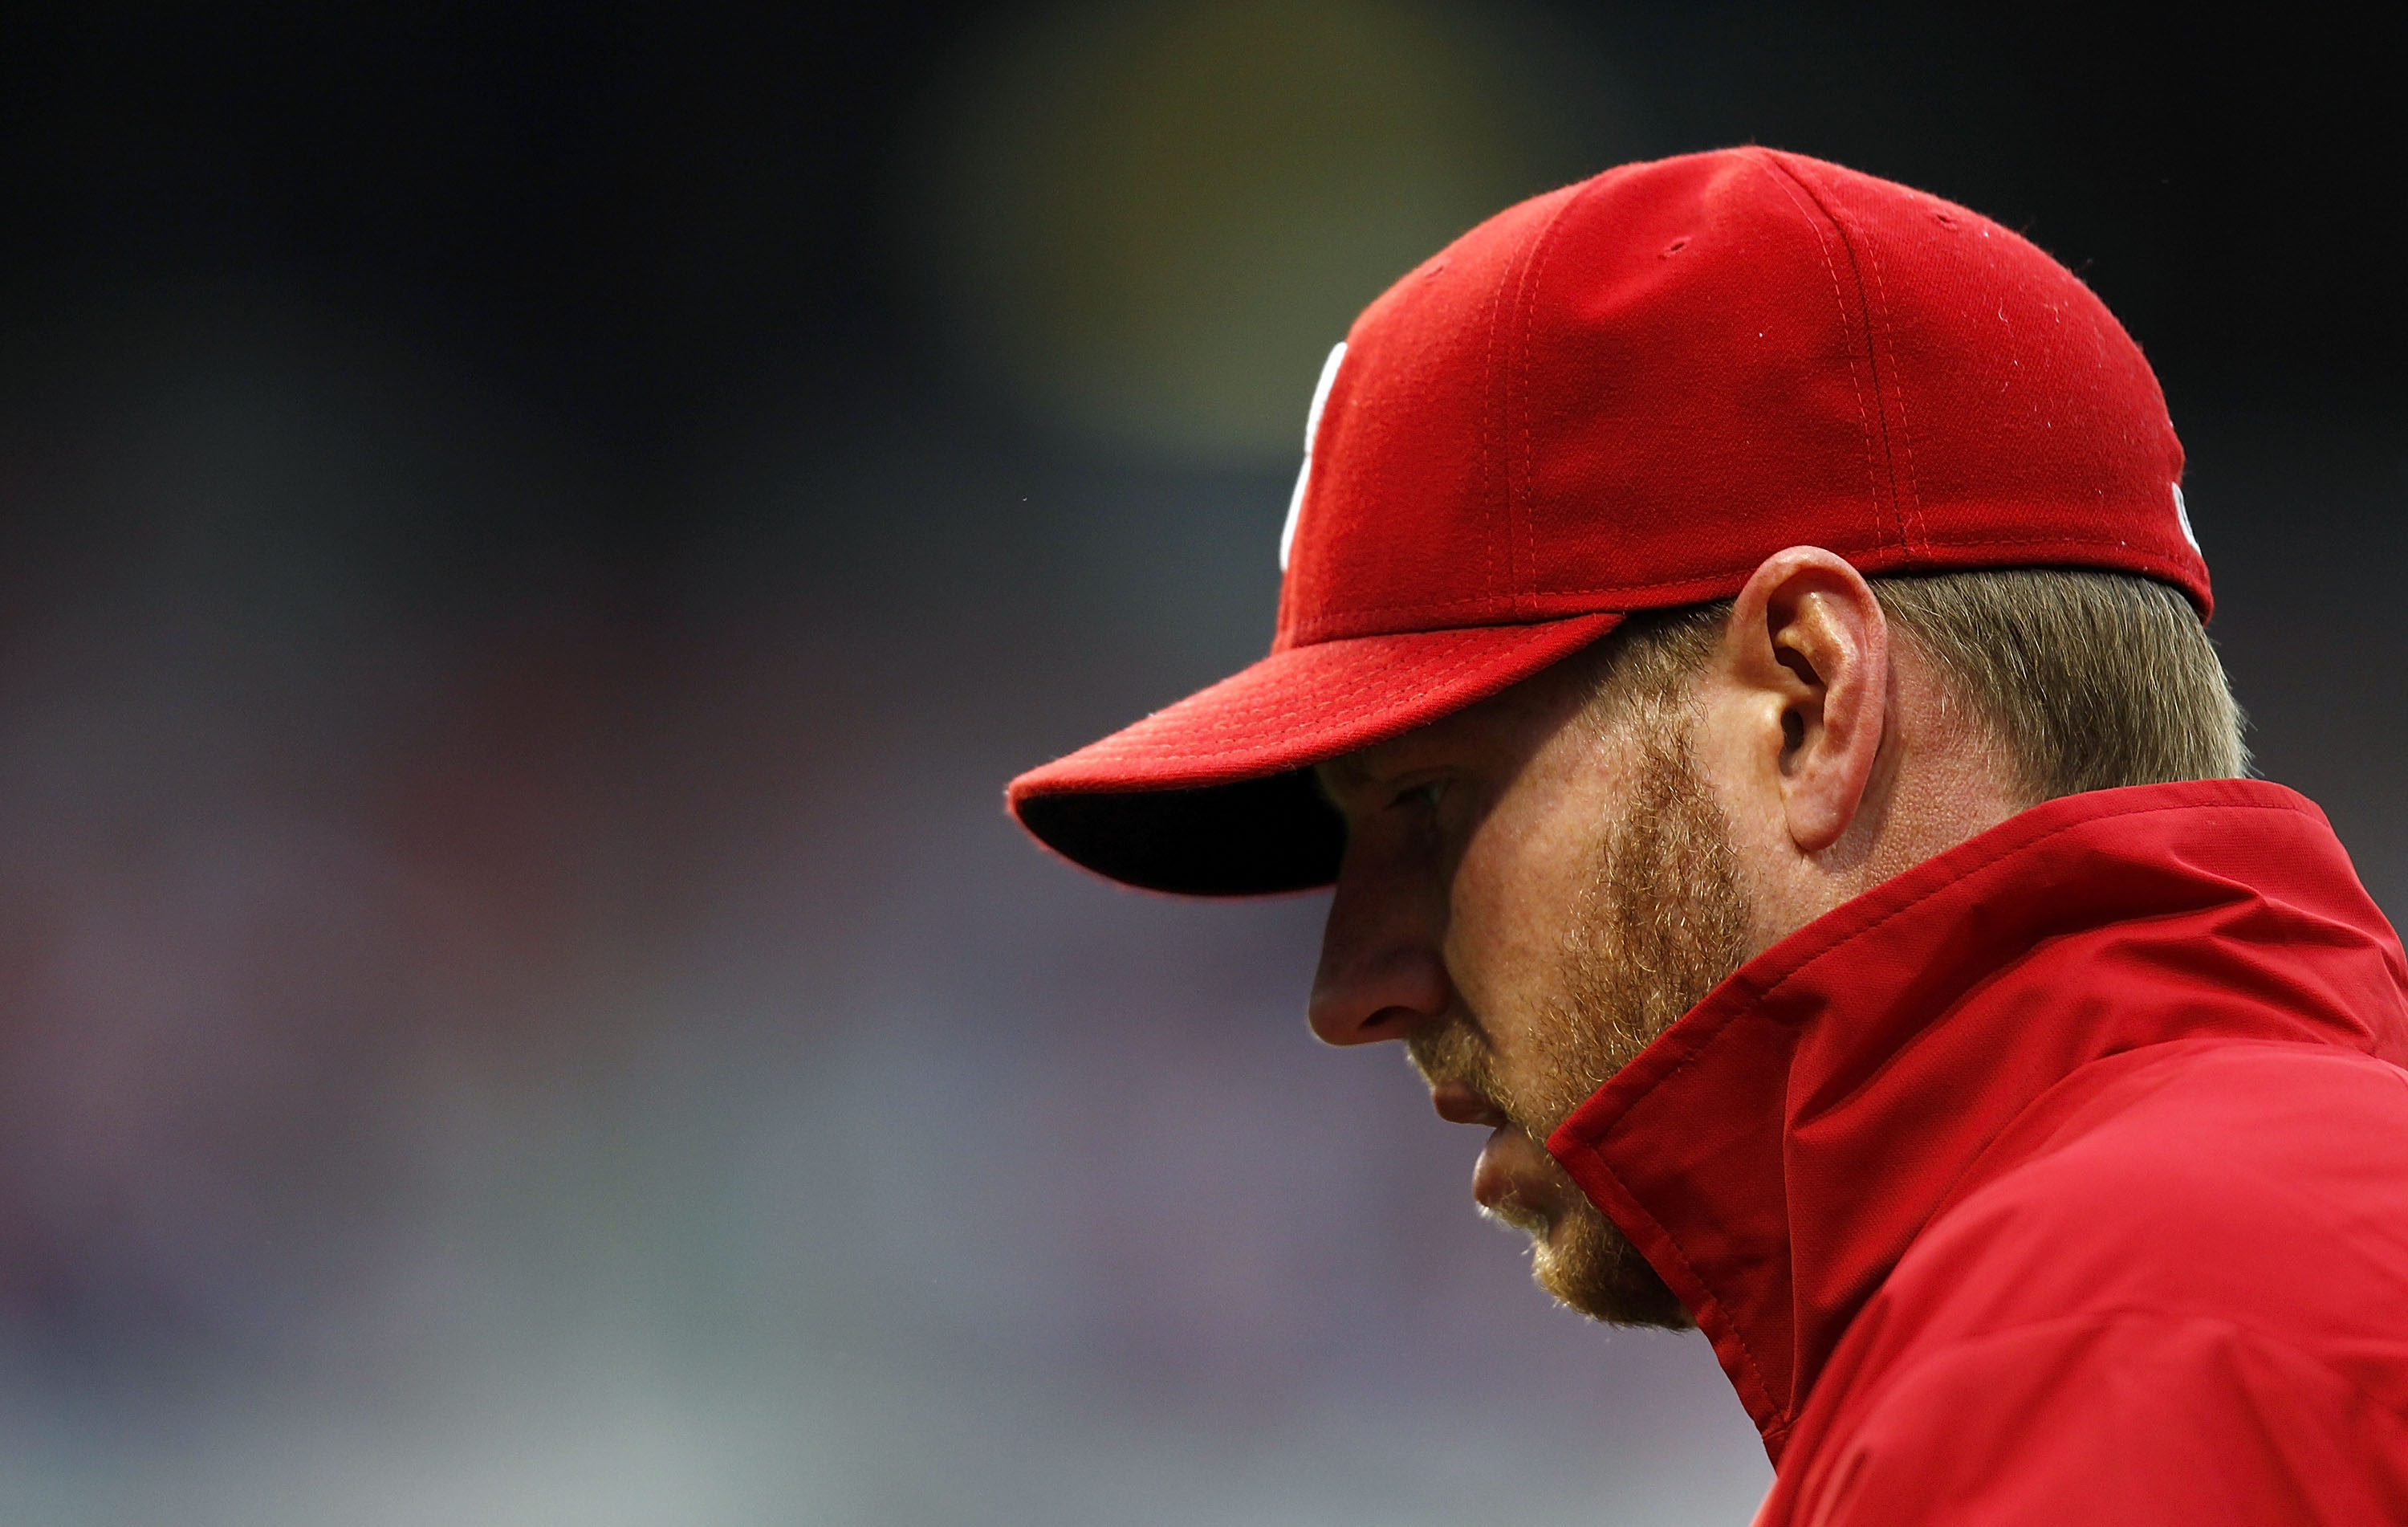 PHILADELPHIA - OCTOBER 06:  Roy Halladay #34 of the Philadelphia Phillies walks to the dugout in Game 1 of the NLDS against the Cincinnati Reds at Citizens Bank Park on October 6, 2010 in Philadelphia, Pennsylvania.  (Photo by Jeff Zelevansky/Getty Images